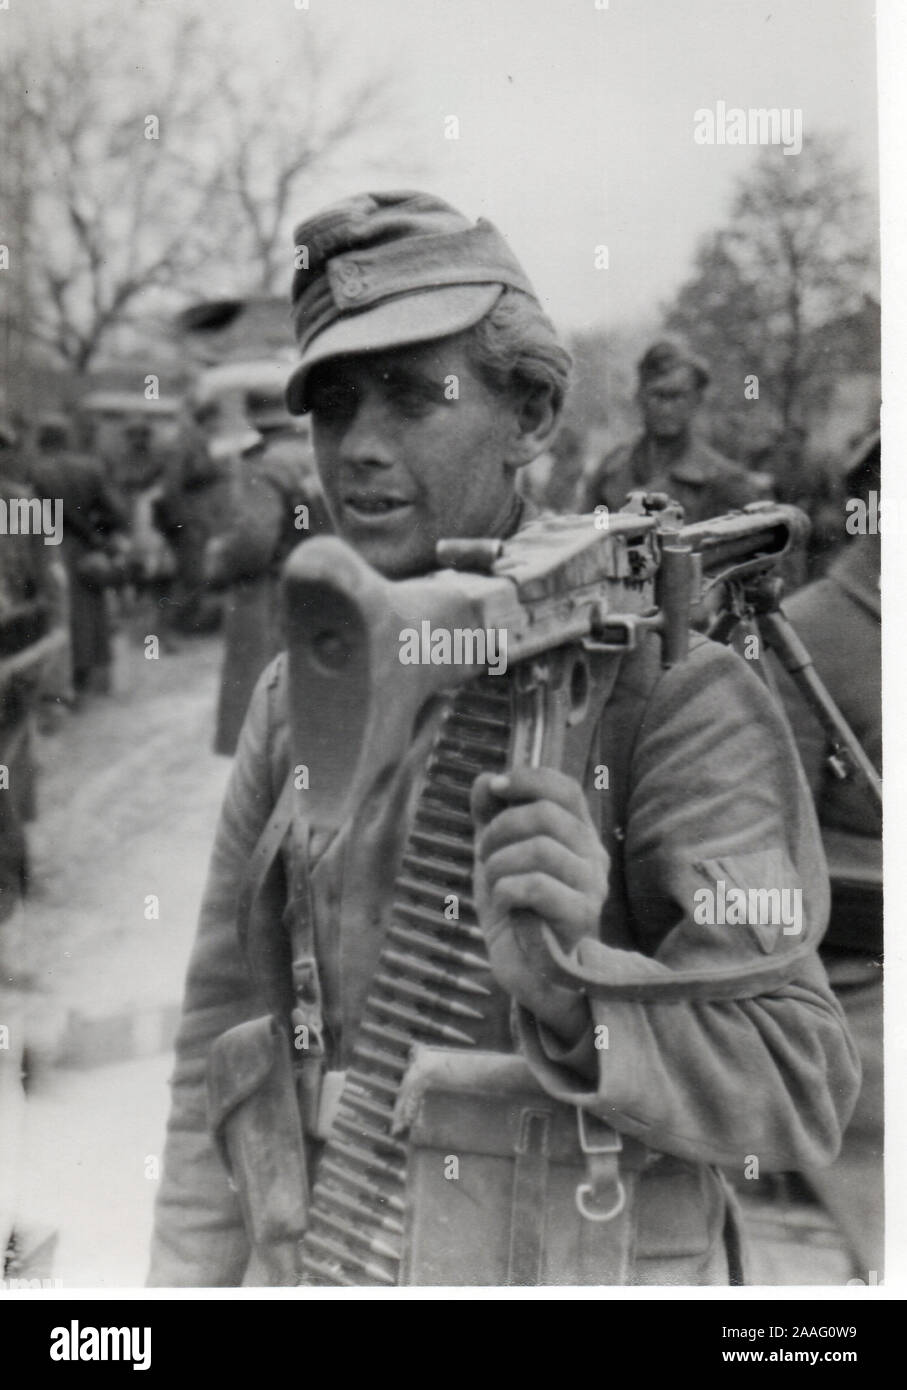 German Soldiers With His Machine Gun Mg42 On The Russian Front During